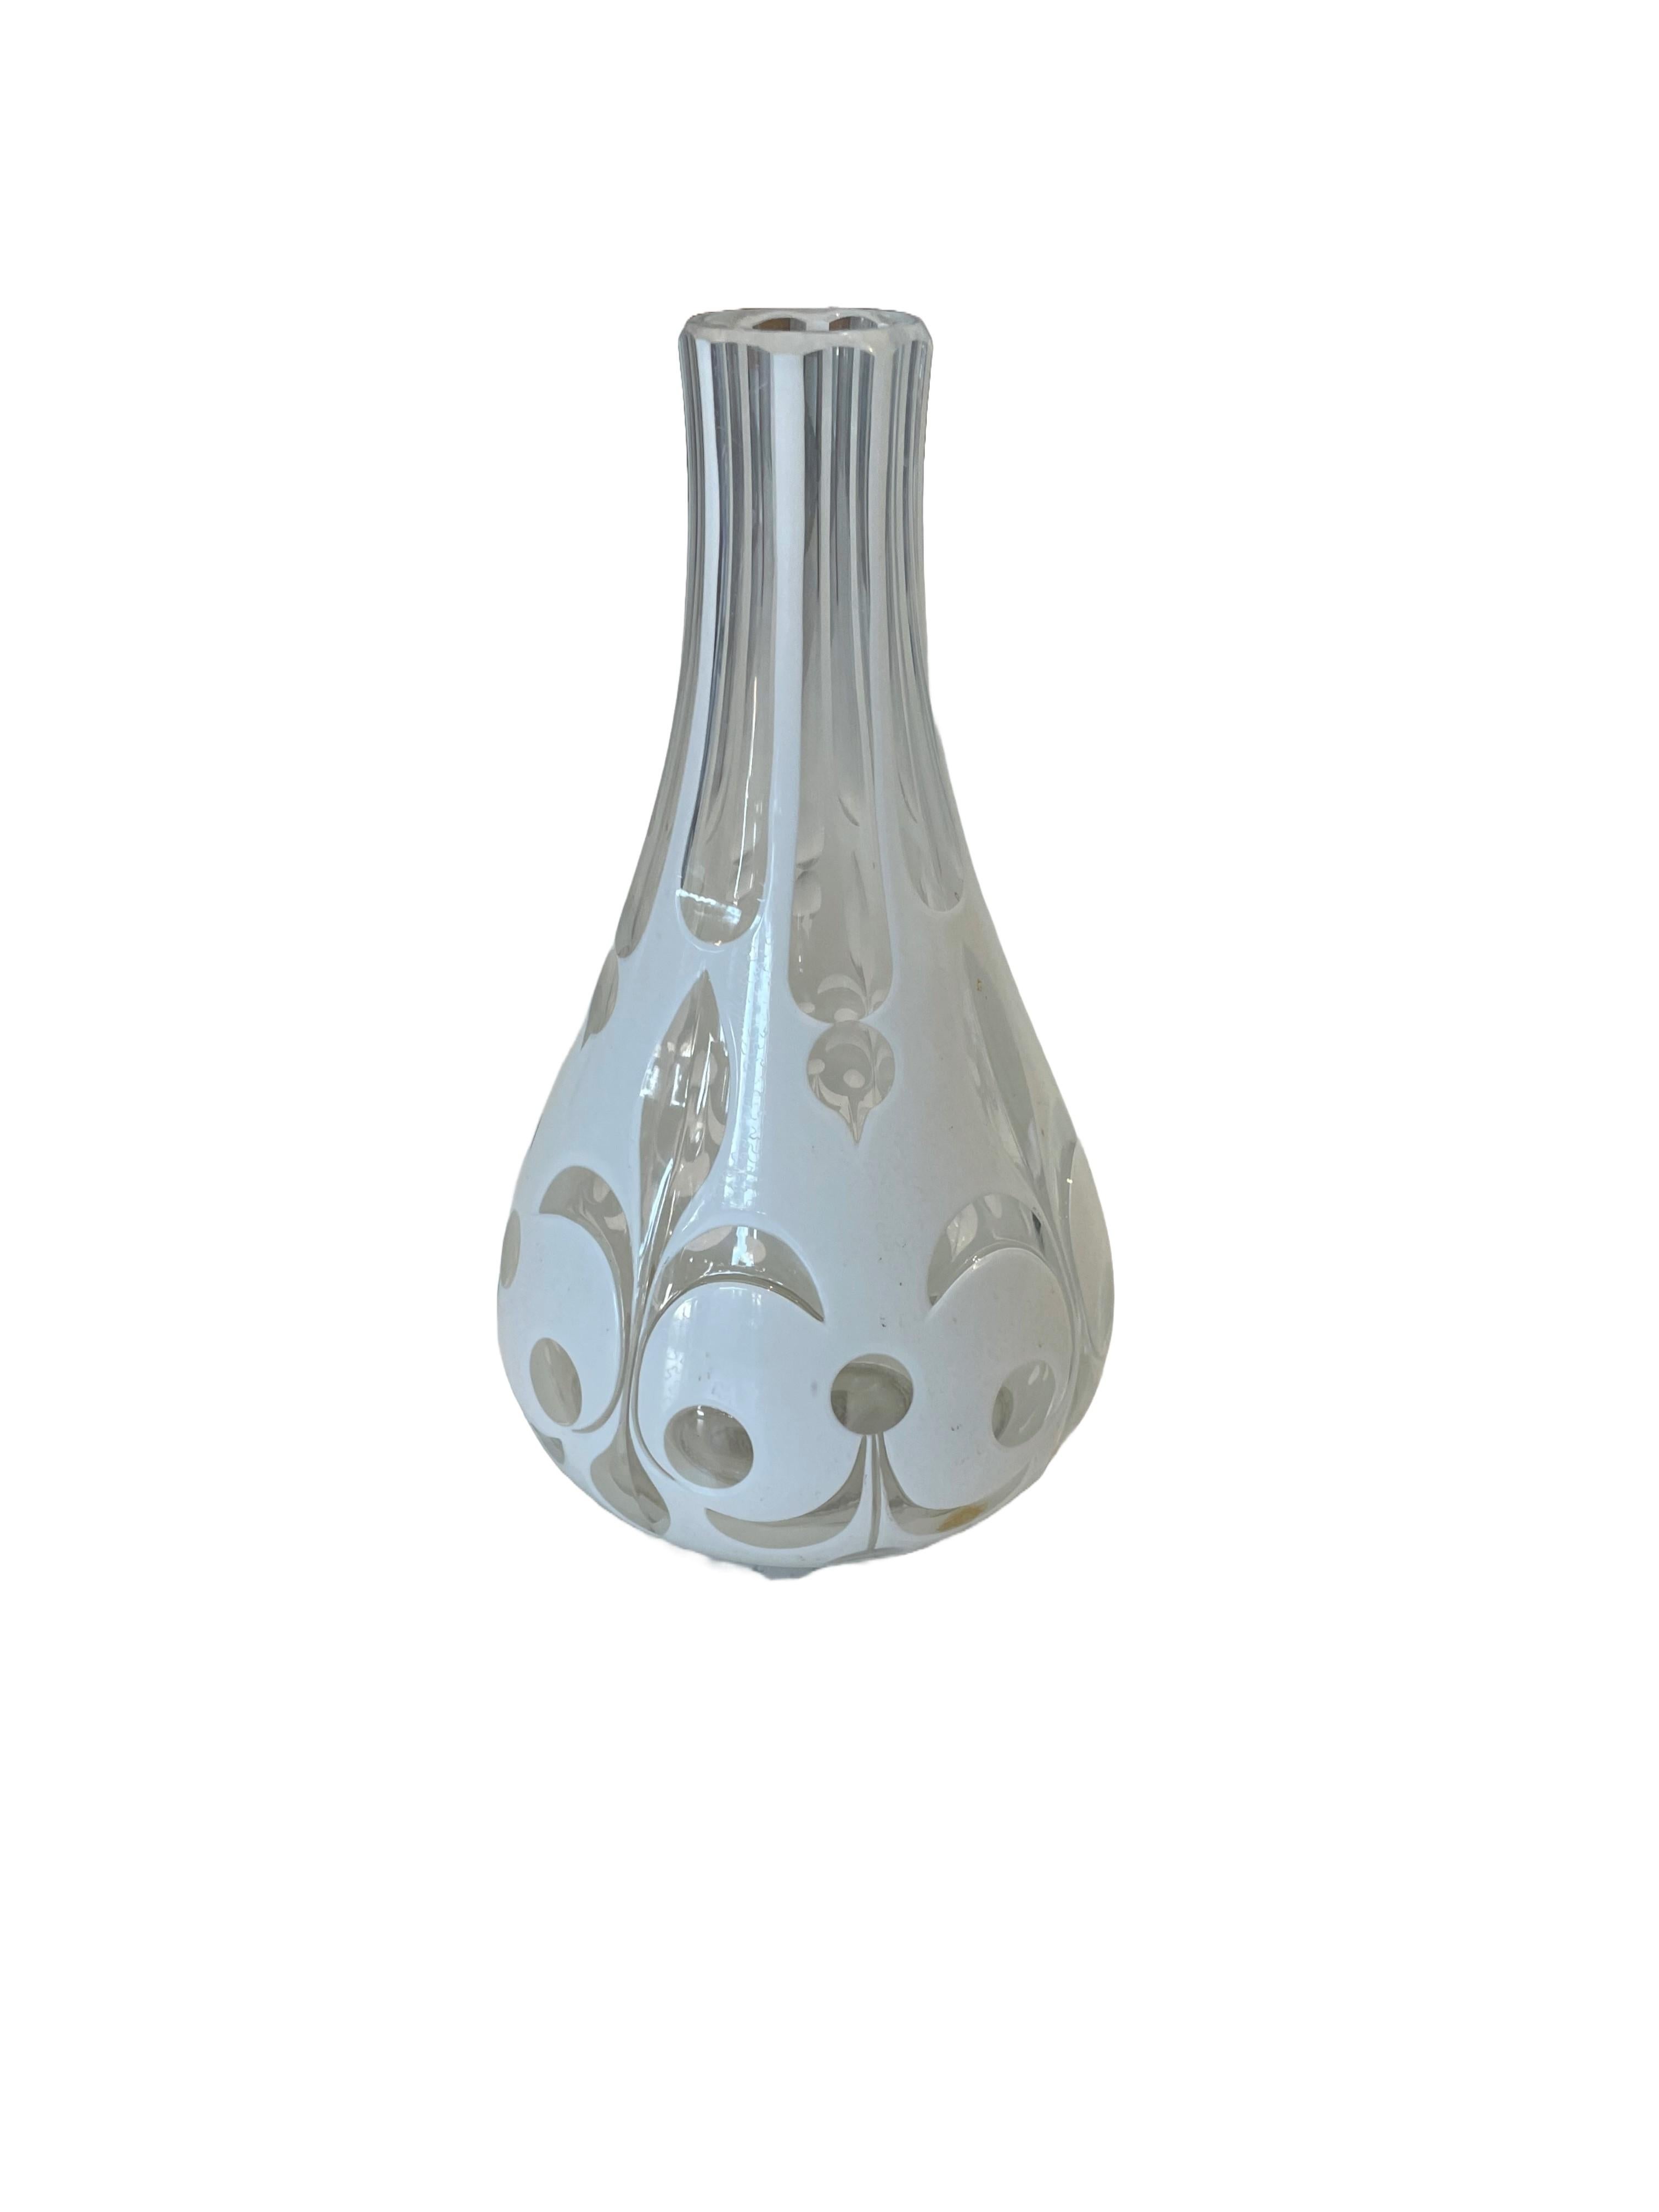 Made by the Bohemian Art Glass manufacturers of the 19th Century, transparent glass with white opaline glass overlay is hand-cut in whimsical a fleur de Lis-themed pattern. This decorative piece is ideal as a vase.